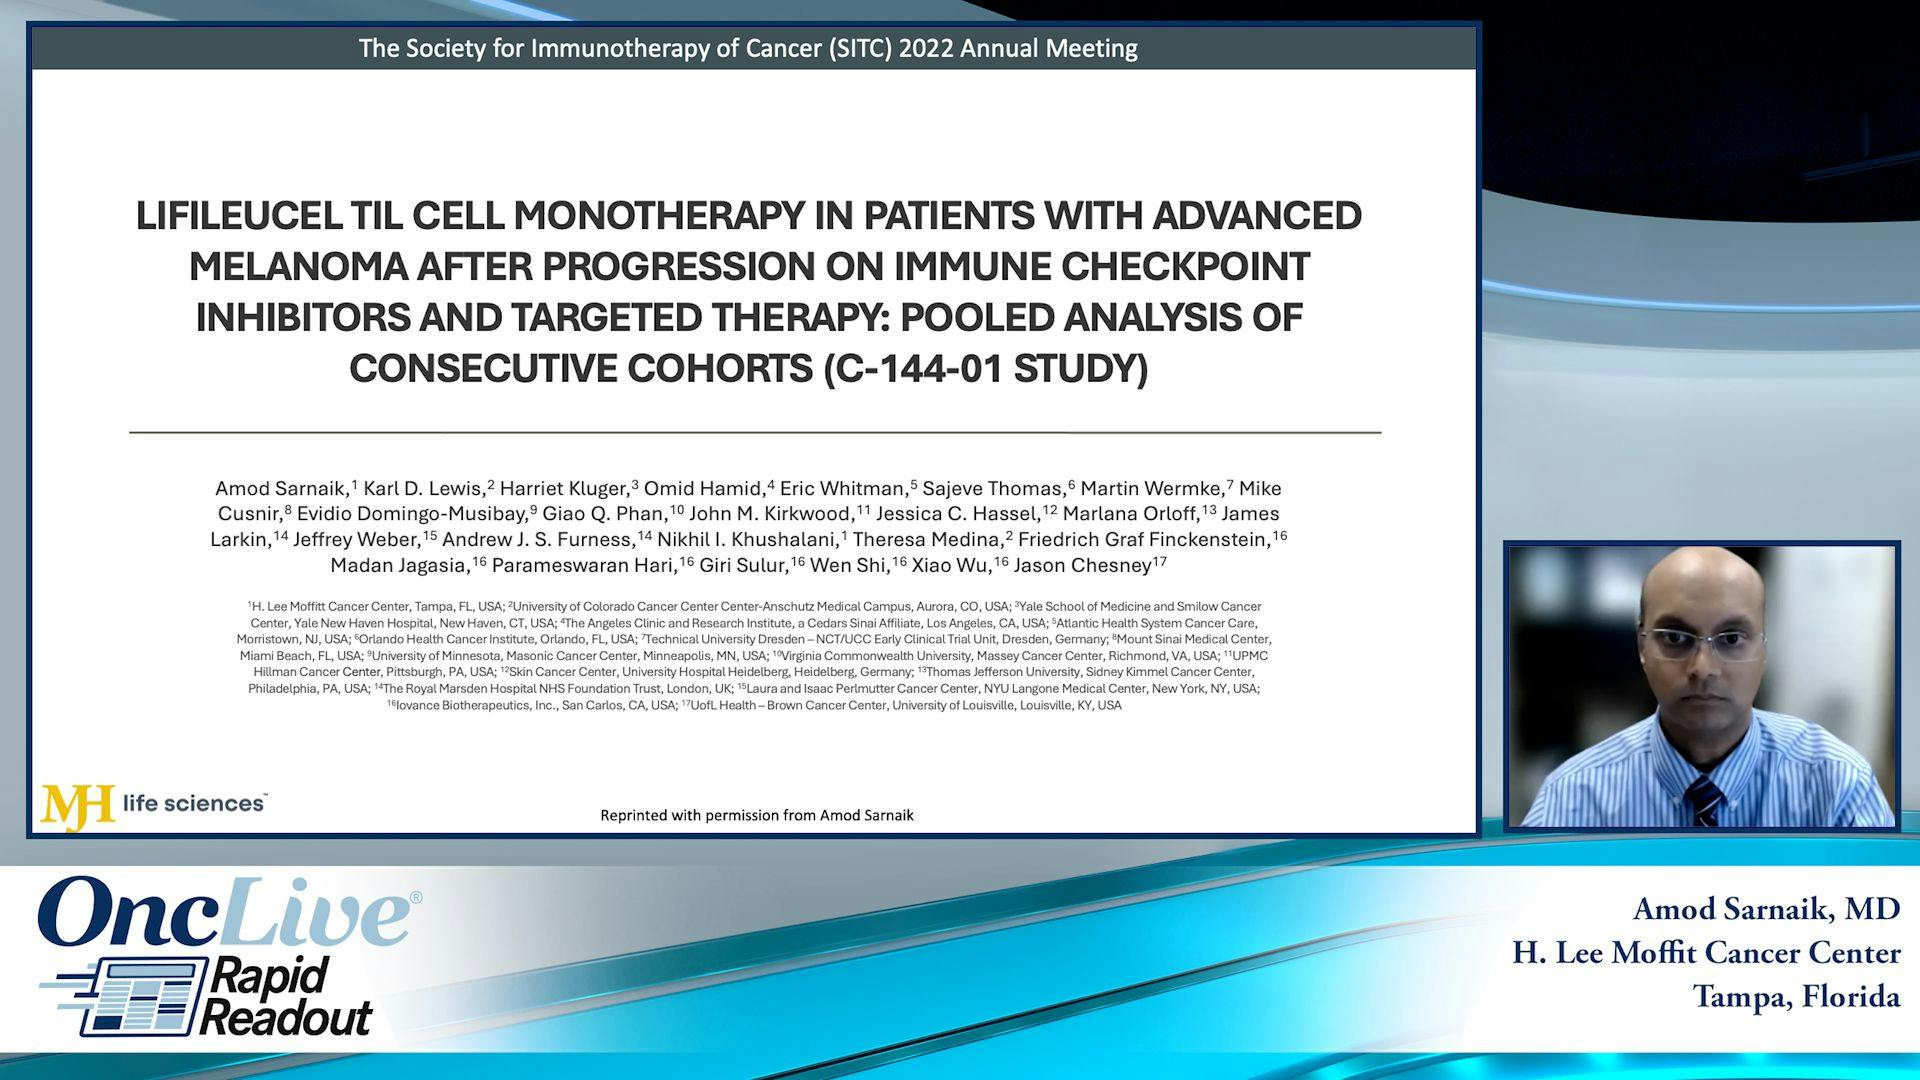 Lifileucel TIL Cell Monotherapy in Patients With Advanced Melanoma After Progression on Immune Checkpoint Inhibitors and Targeted Therapy: Pooled Analysis of Consecutive Cohorts (C-144-01 Study)